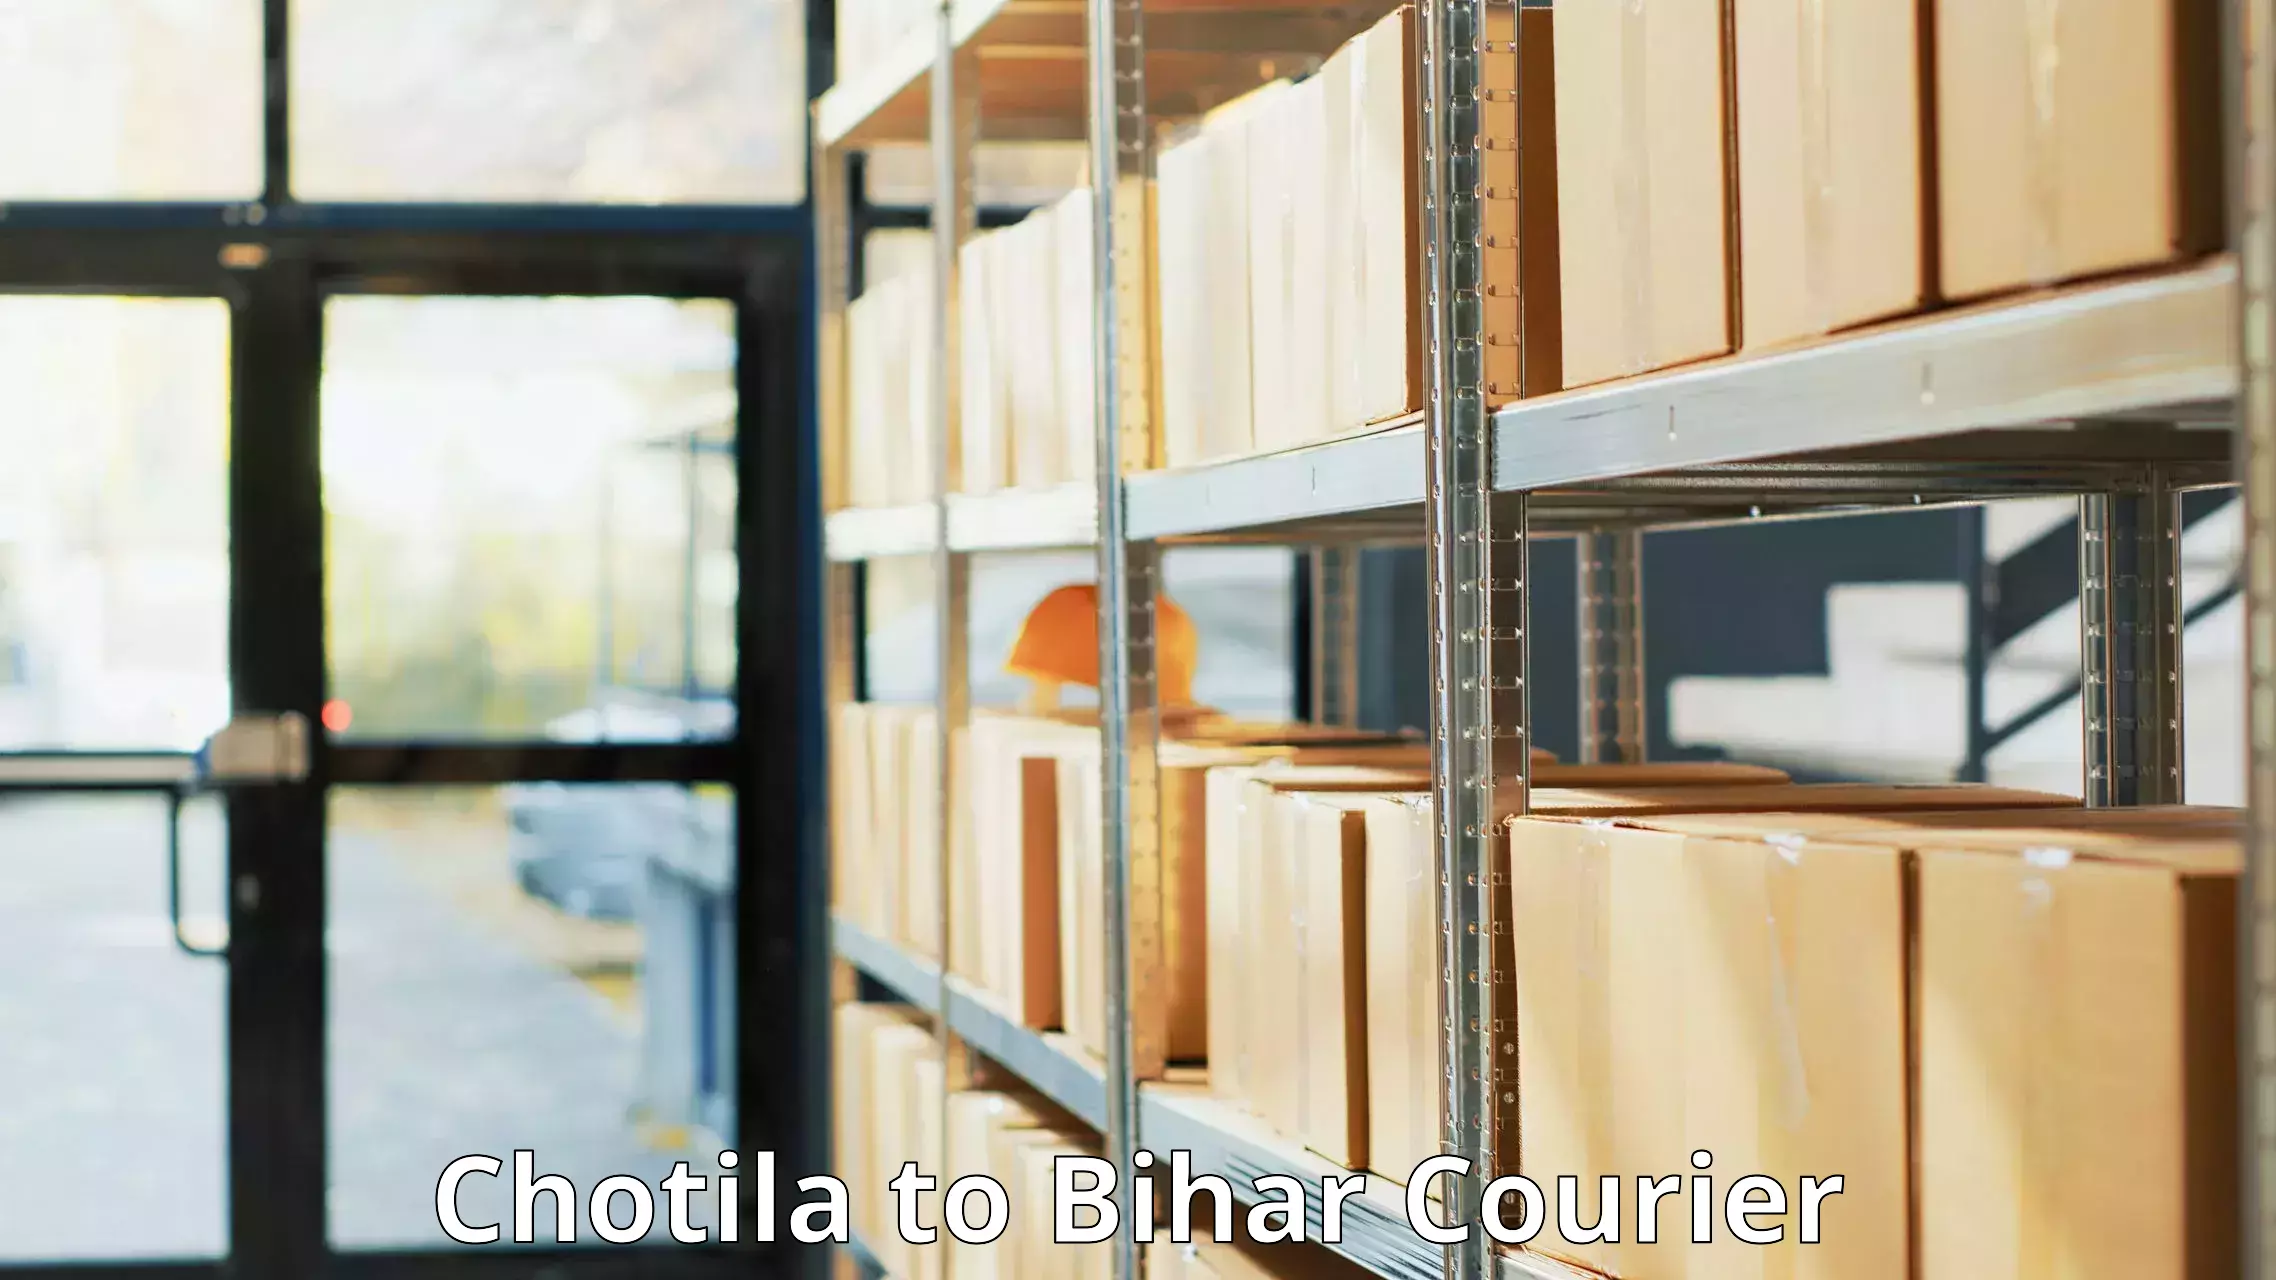 Customizable delivery plans Chotila to Birpur